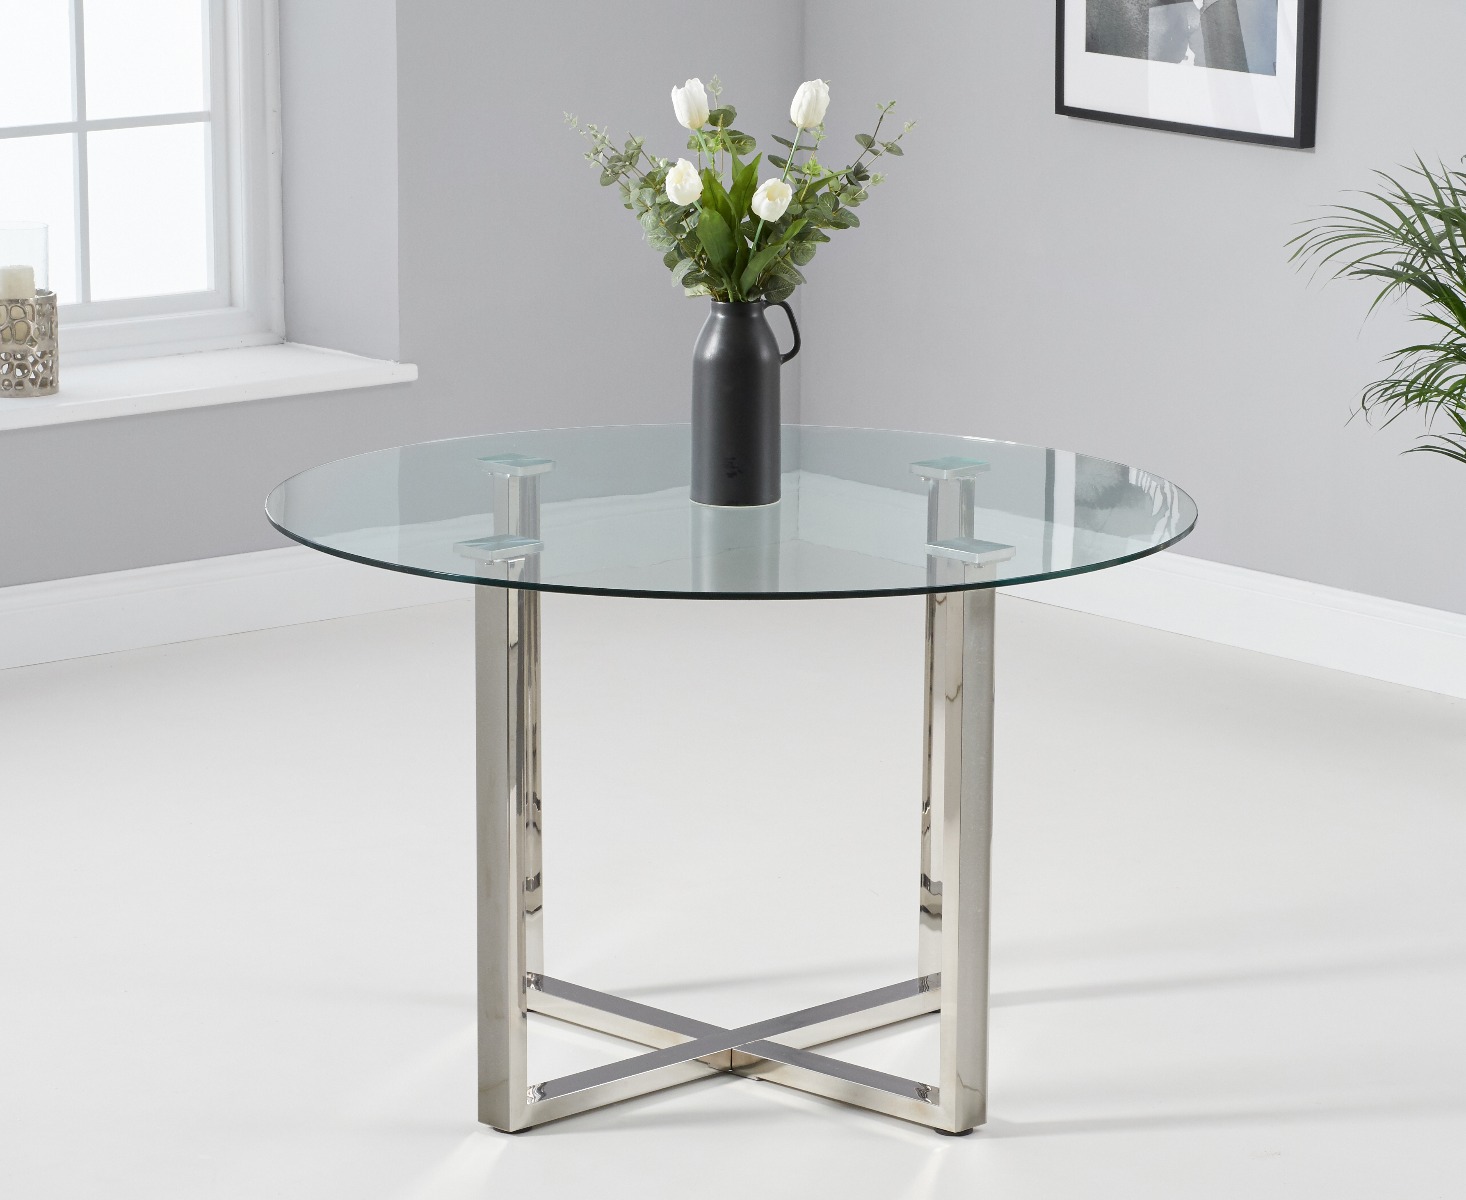 Photo 4 of Vaso 120cm round glass dining table with 4 grey enzo chairs